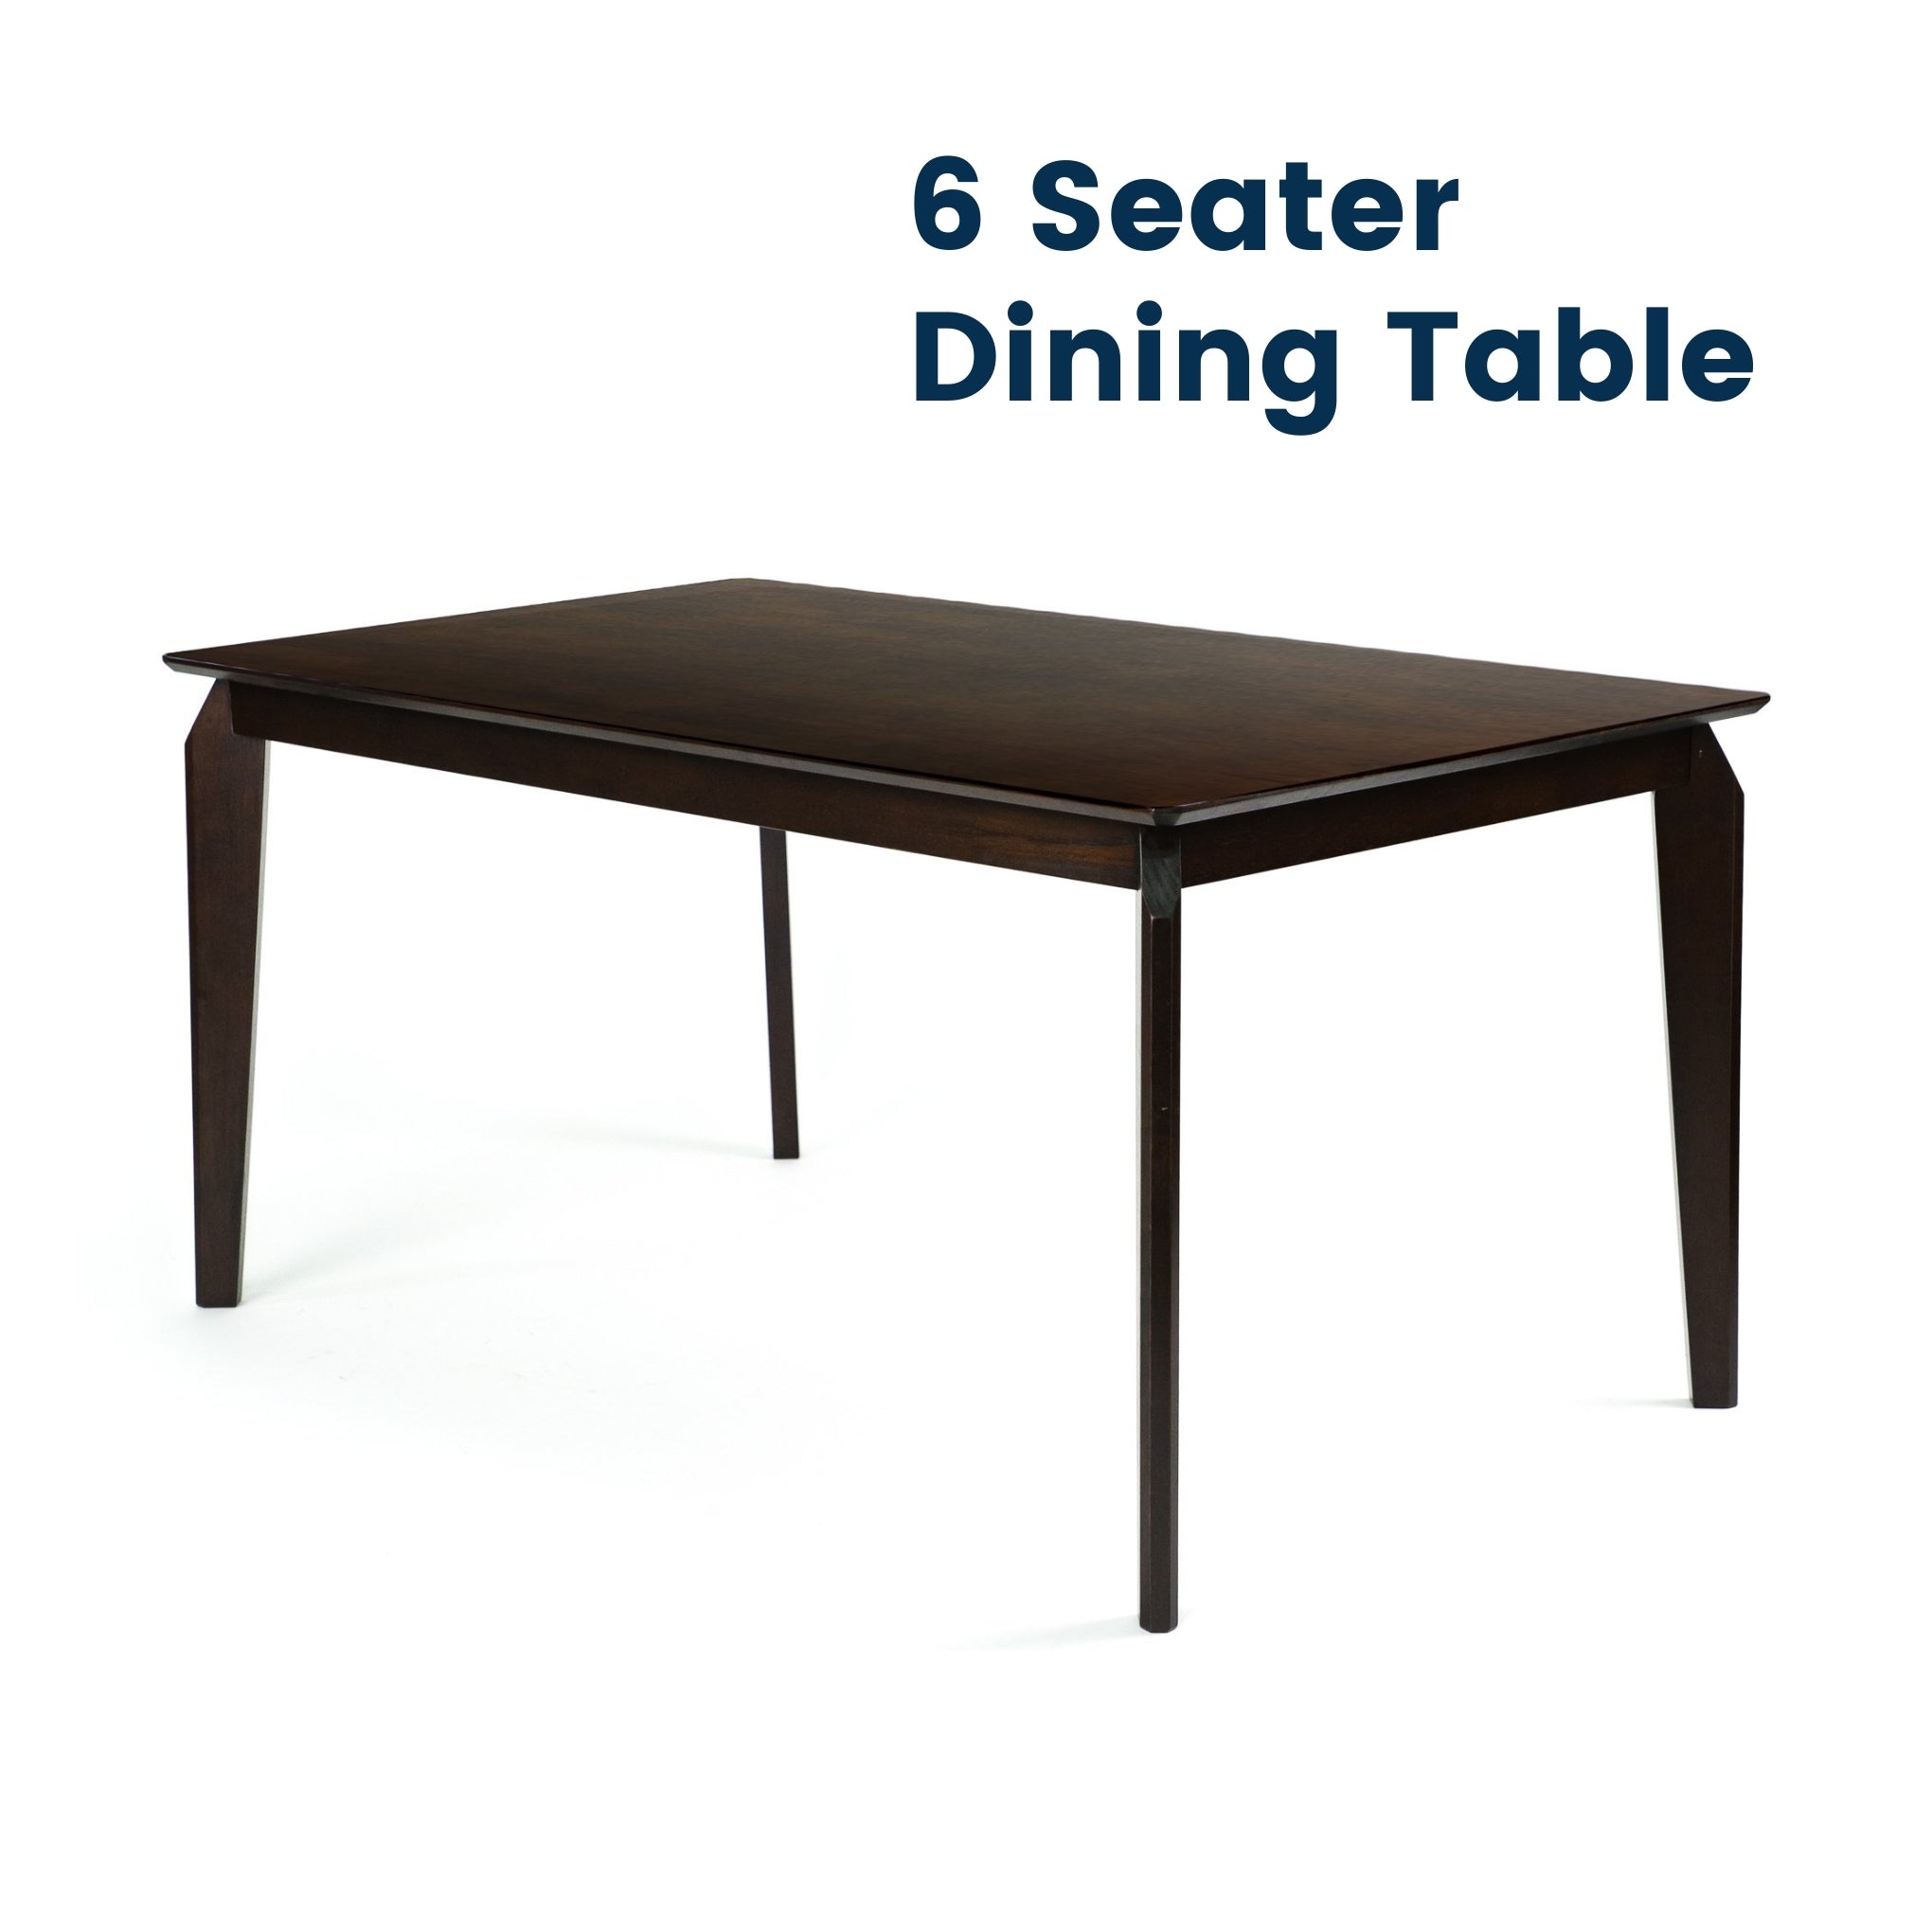 Drake Dining Table with Wooden Leg